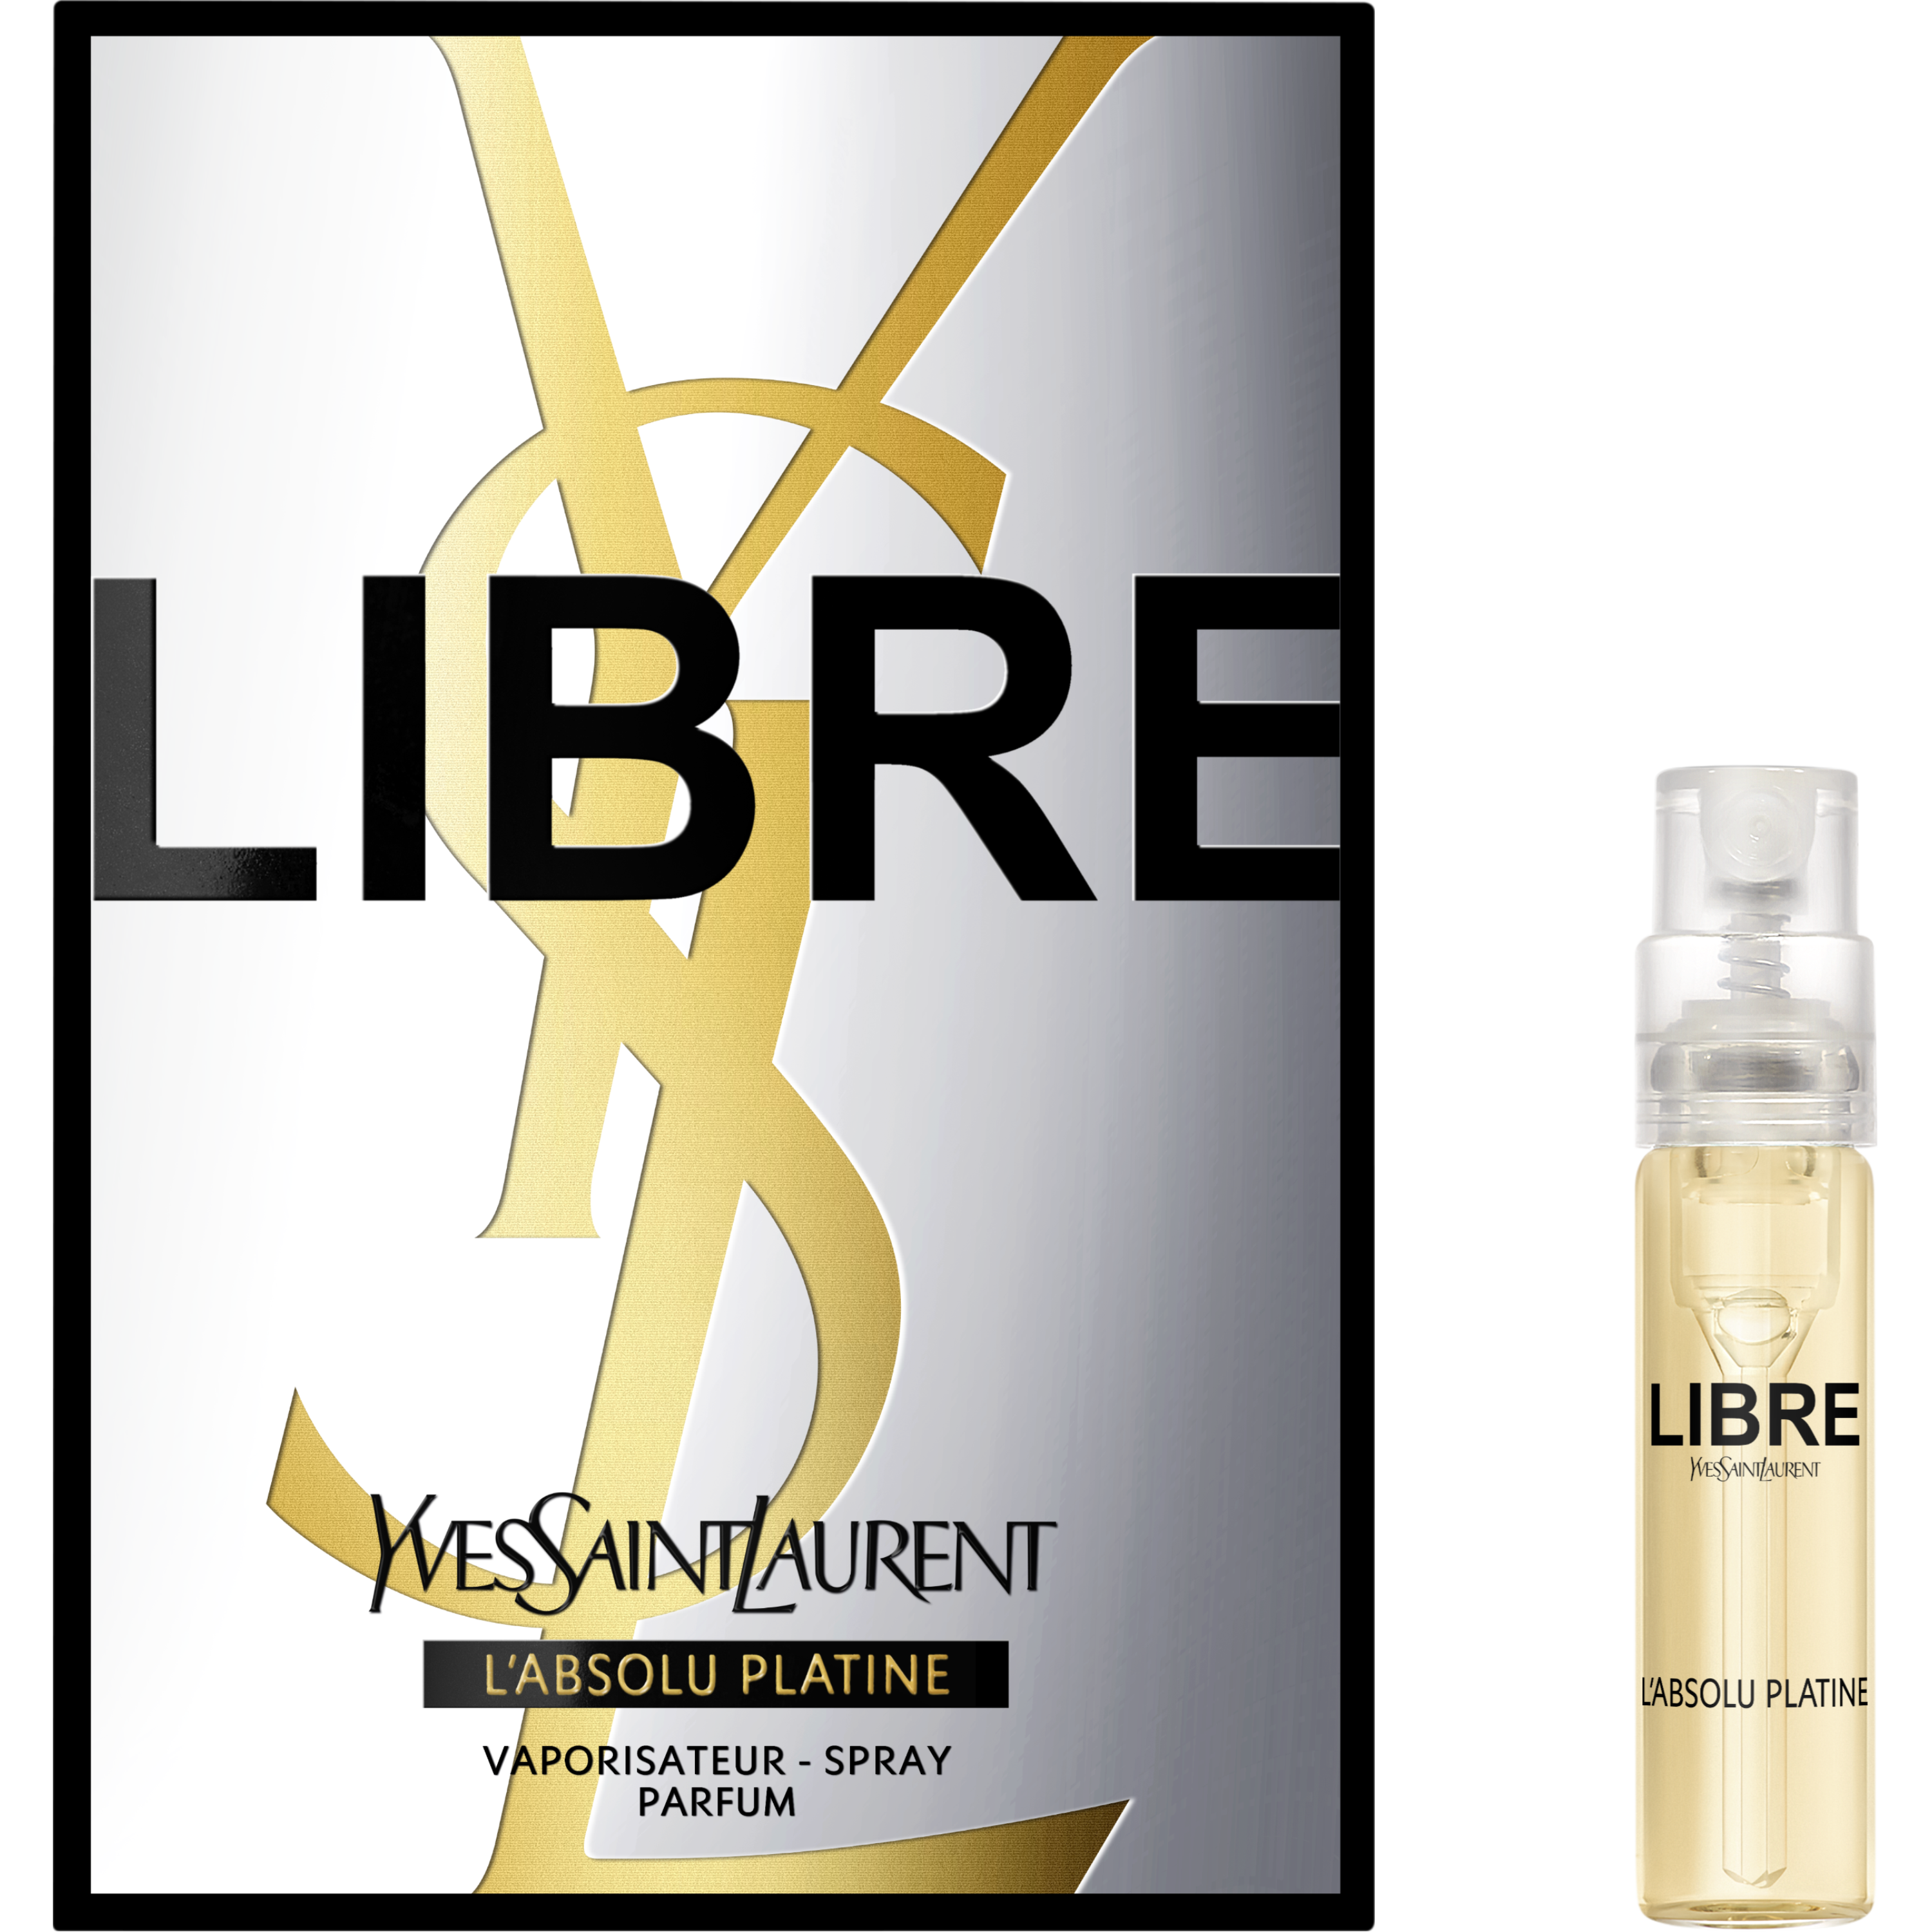 Purchase YSL Libre Absolu Platine and receive a sample size to try